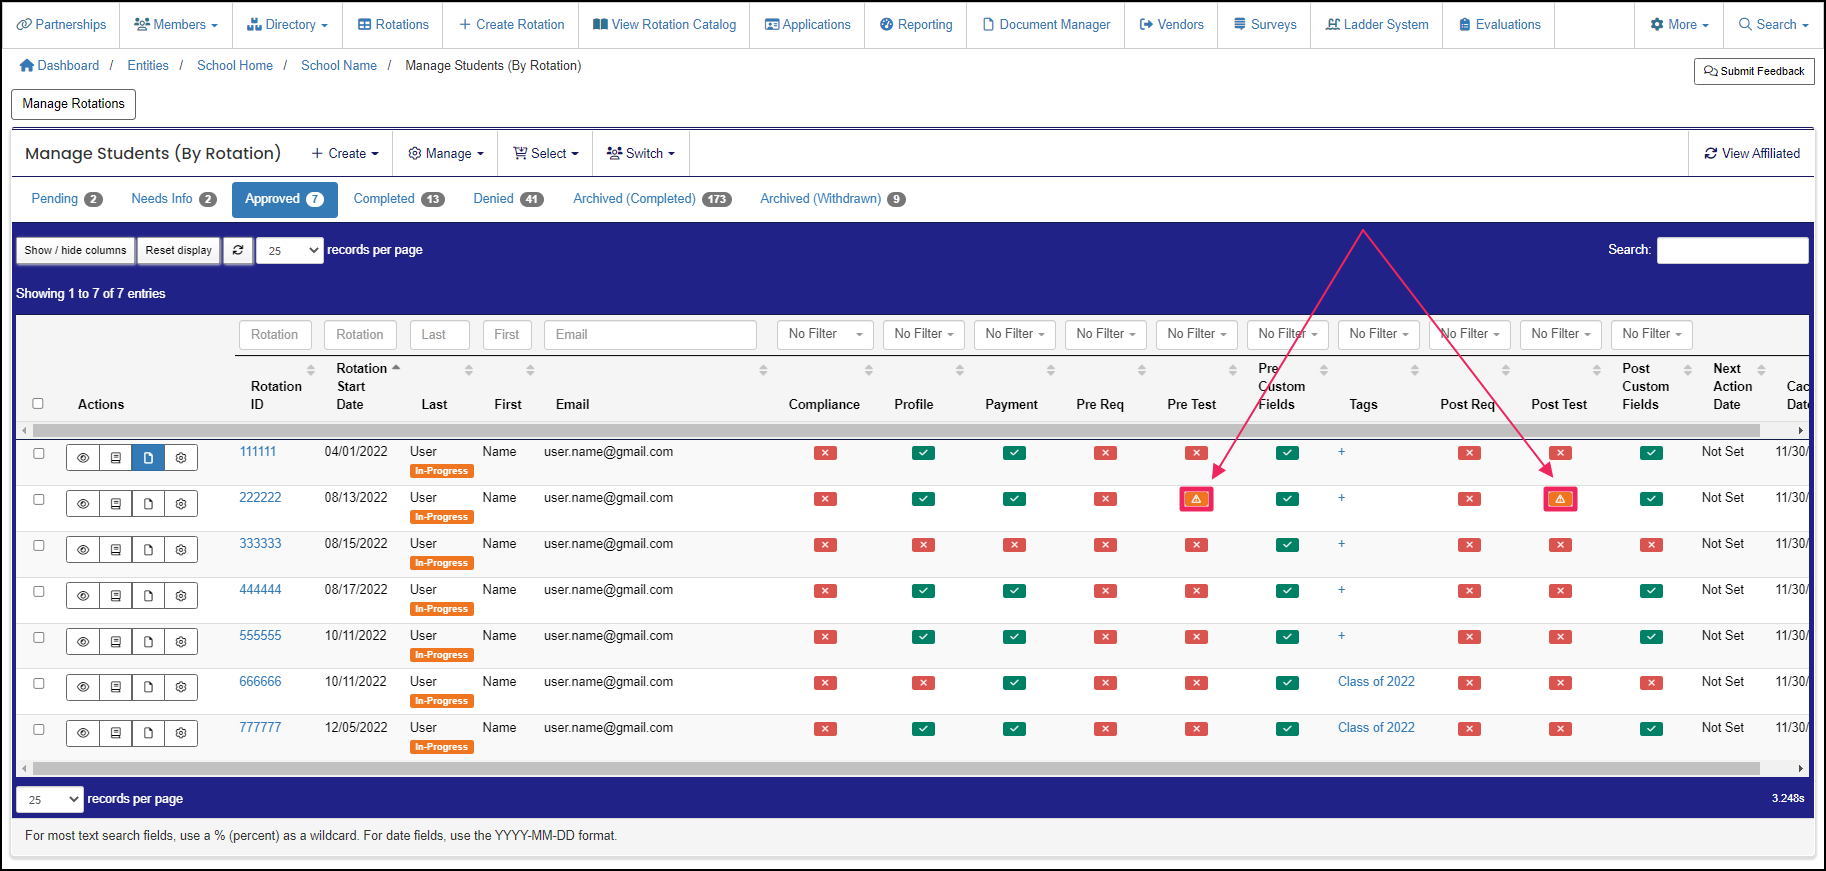 Manage members by rotation table highlighting expired compliance items